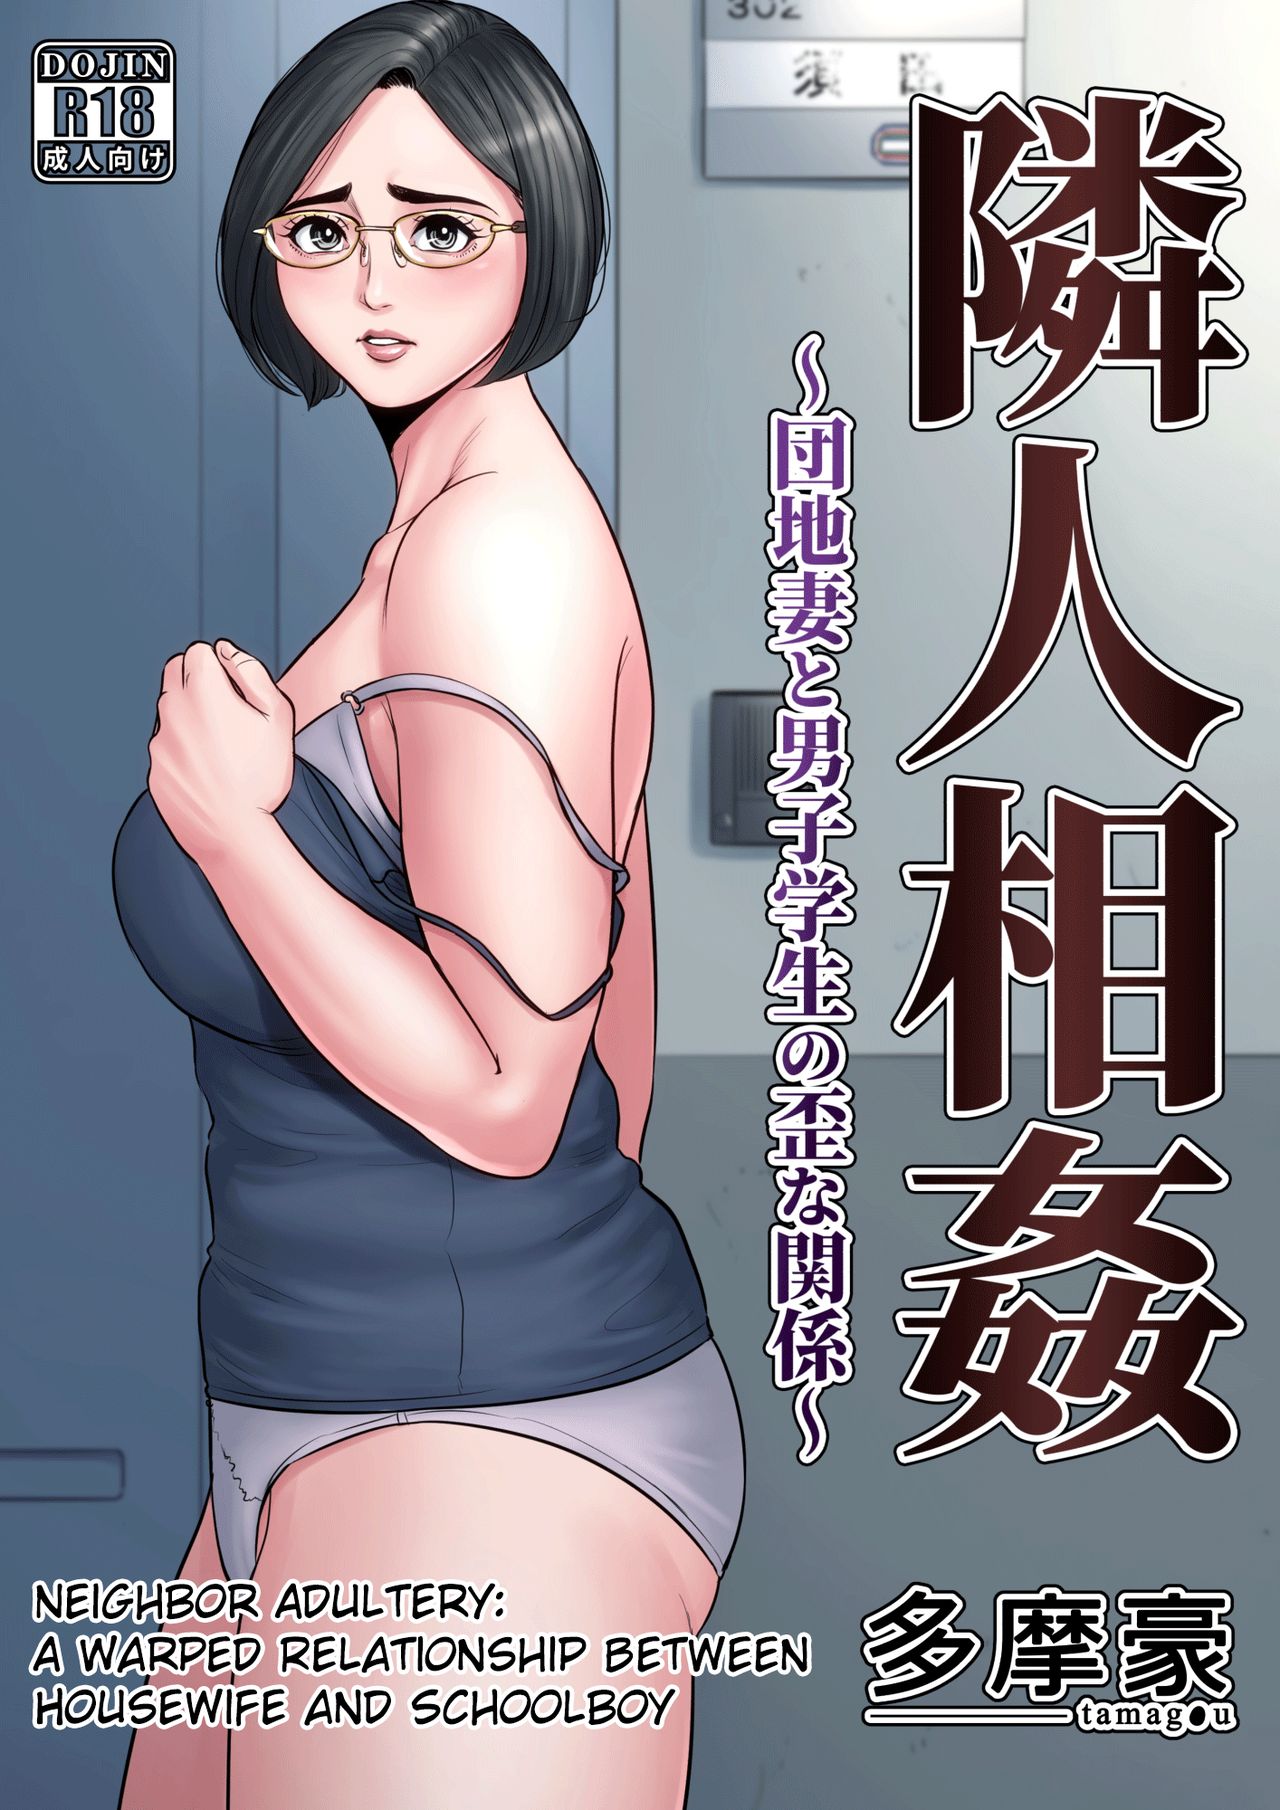 Neighbor Adultery ~ A Warped Relationship Between Housewife and Schoolboy Tamagou